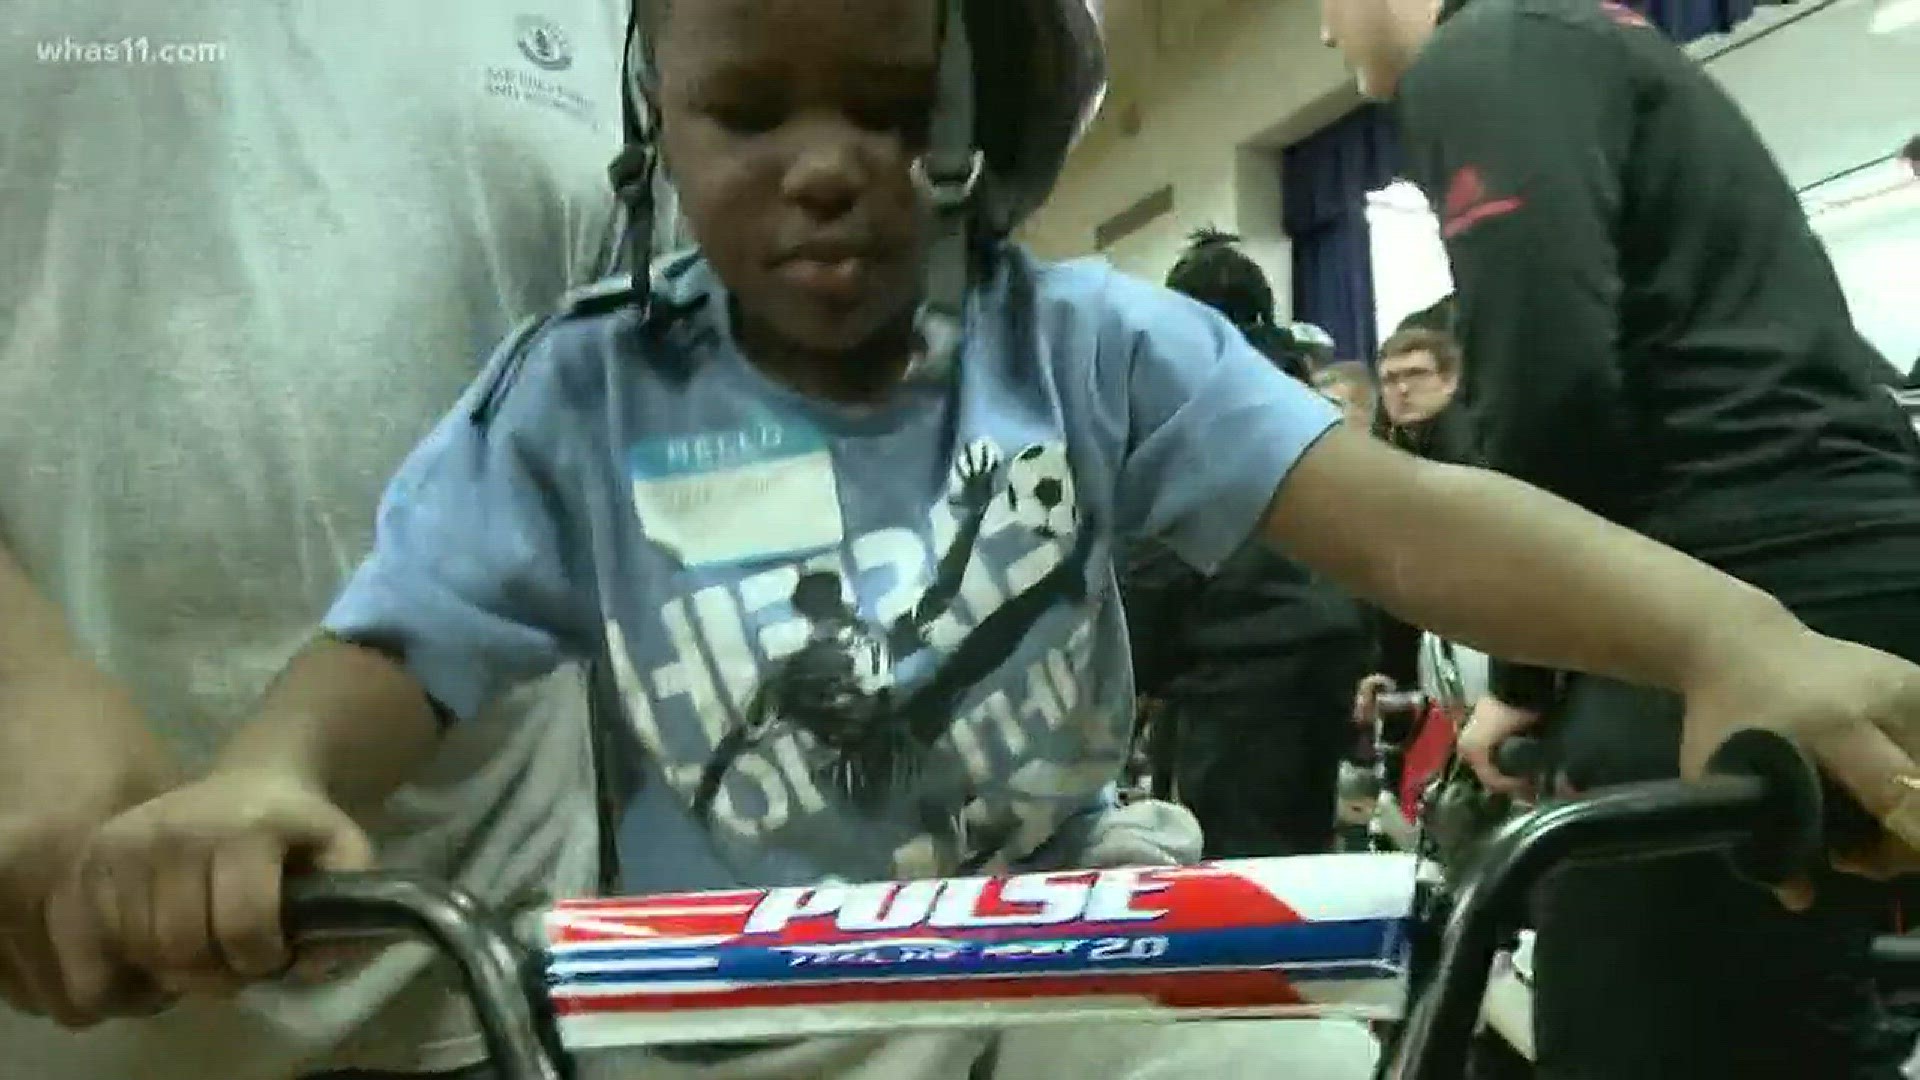 Local honor roll students get special bike delivery